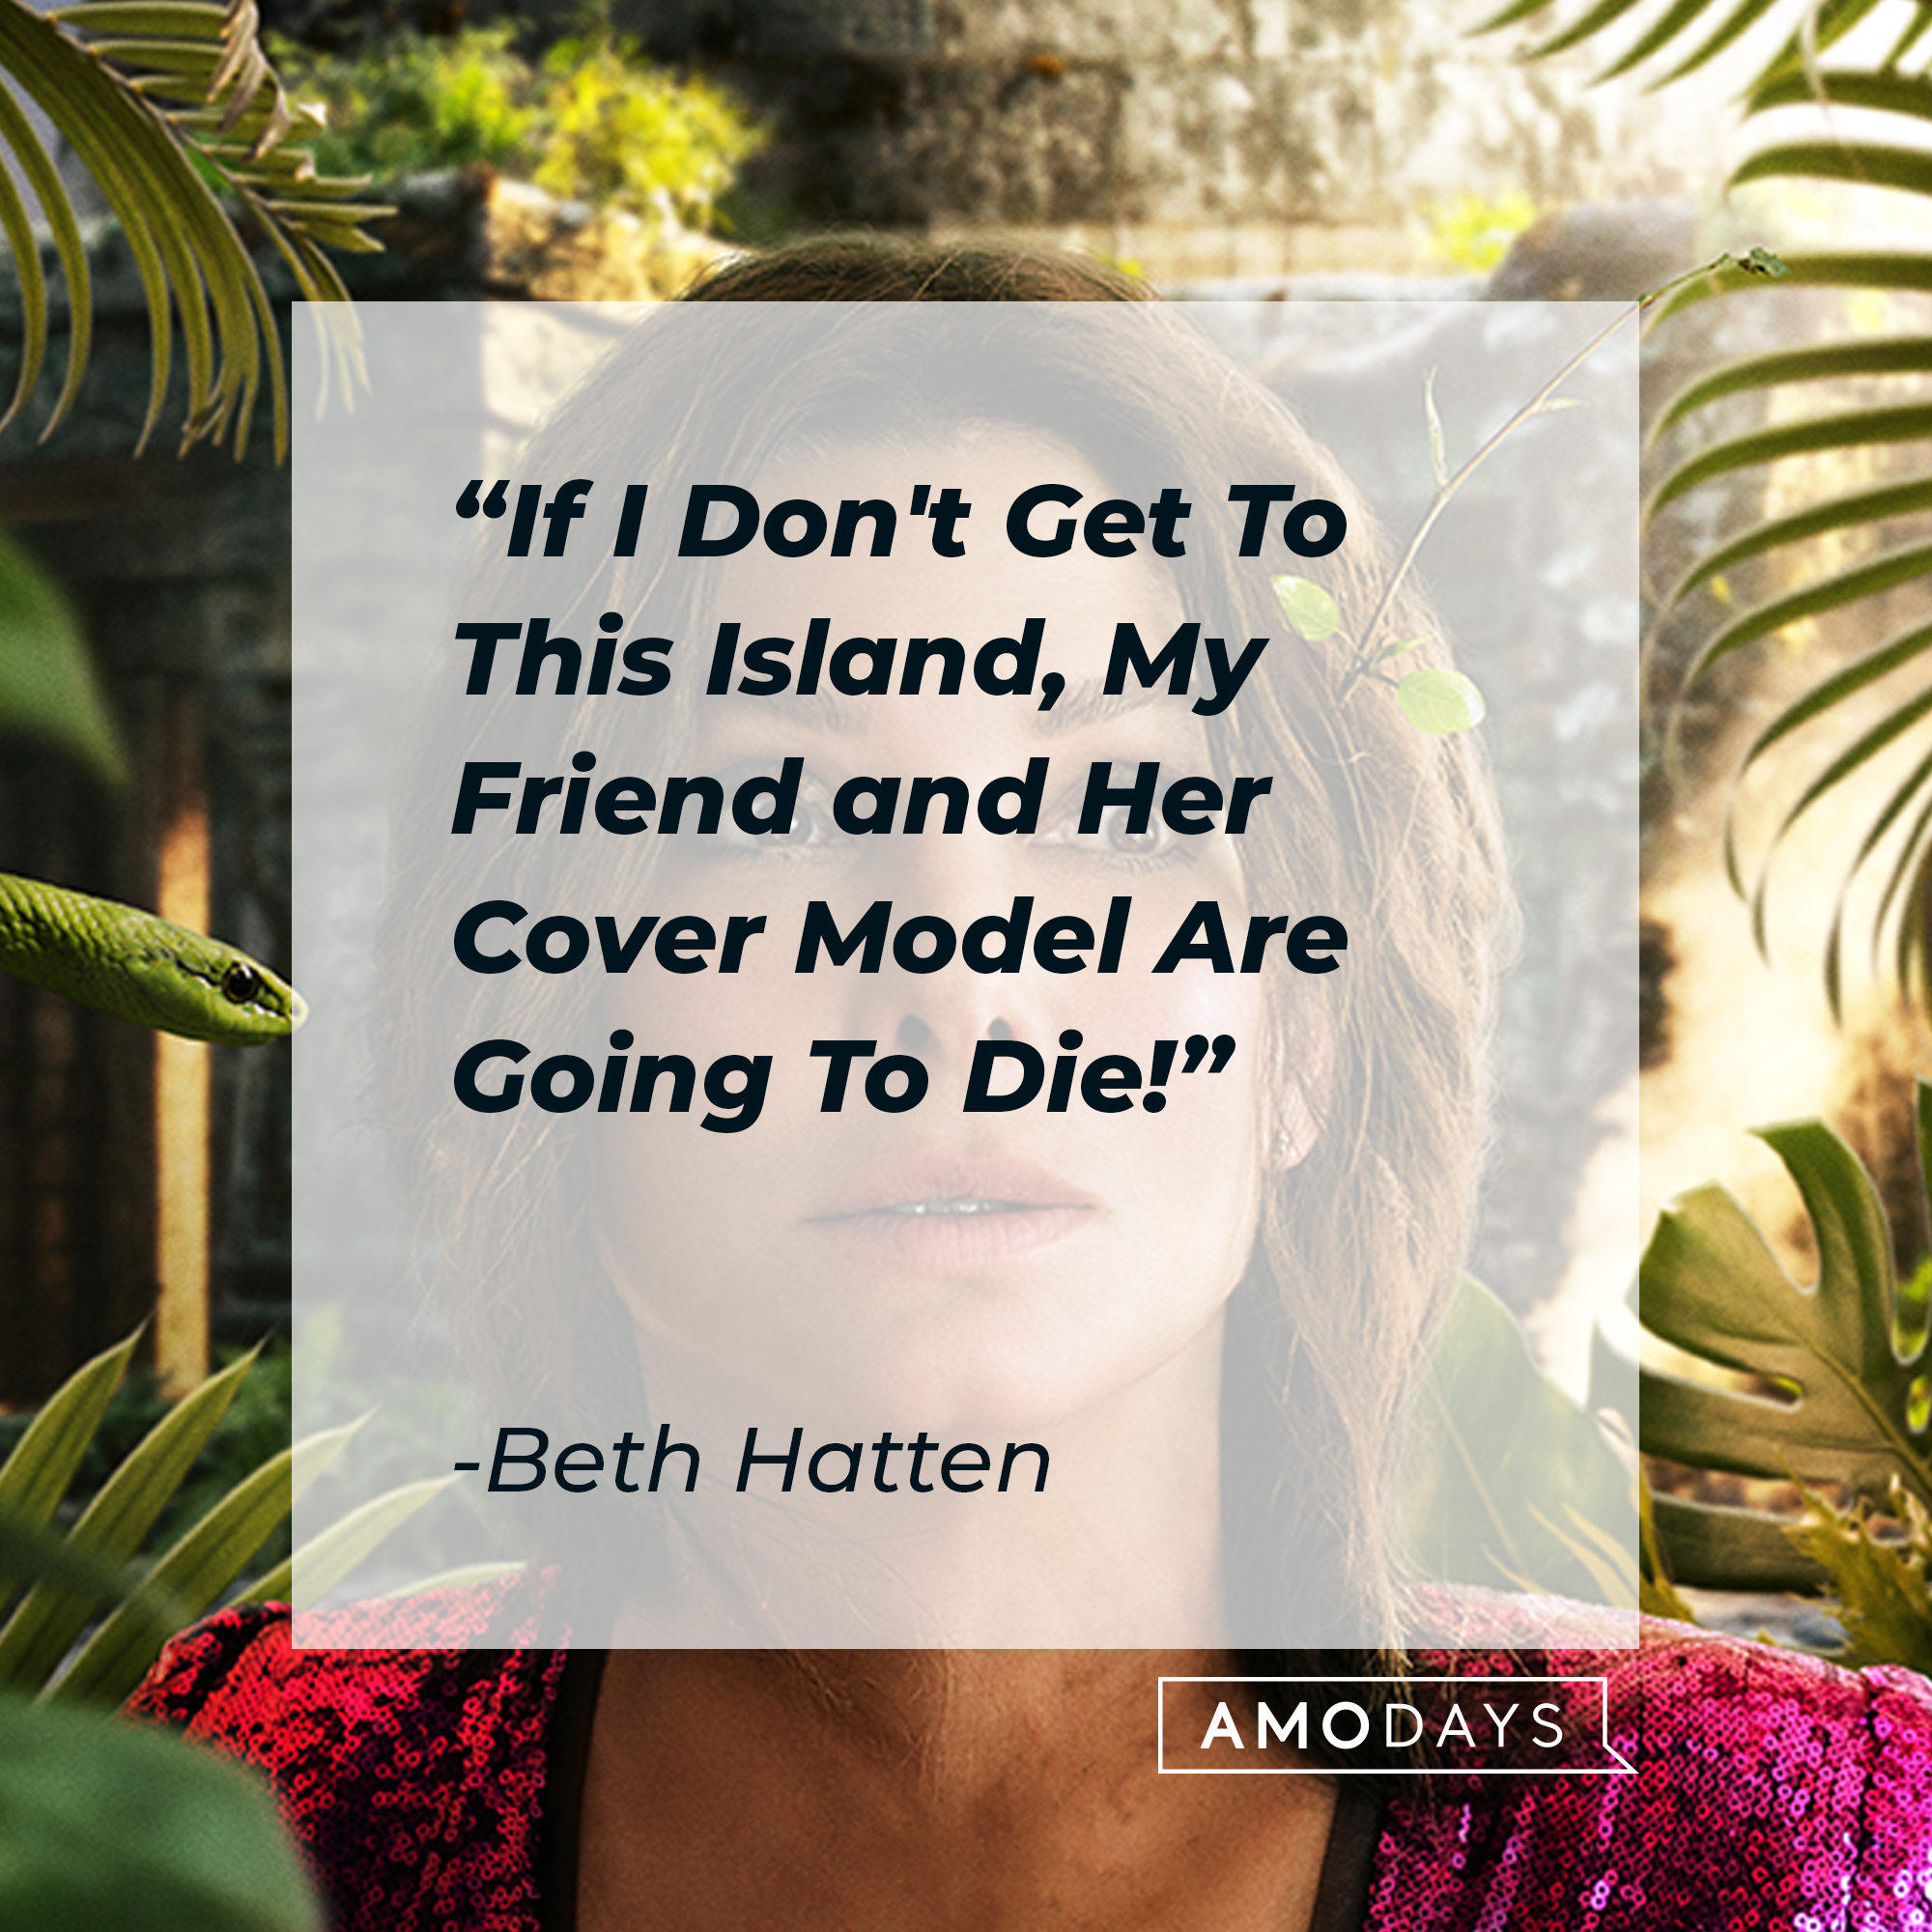 Beth Hatten with her quote: "If I Don't Get To This Island, My Friend and Her Cover Model Are Going To Die!" | Source: facebook.com/TheLostCityMovie